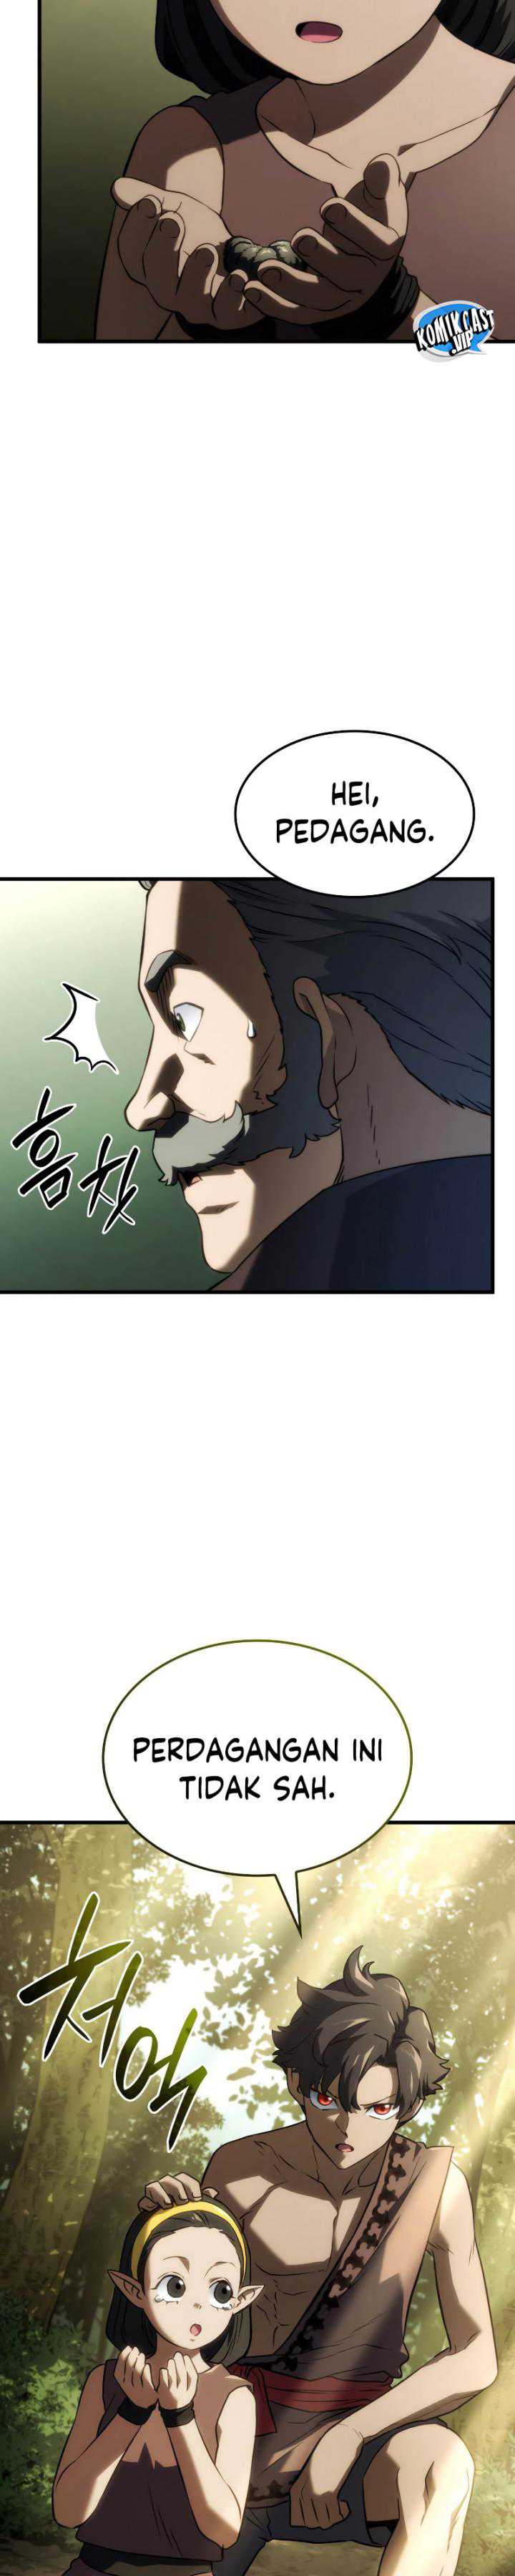 Revenge of the Iron-Blooded Sword Hound Chapter 38